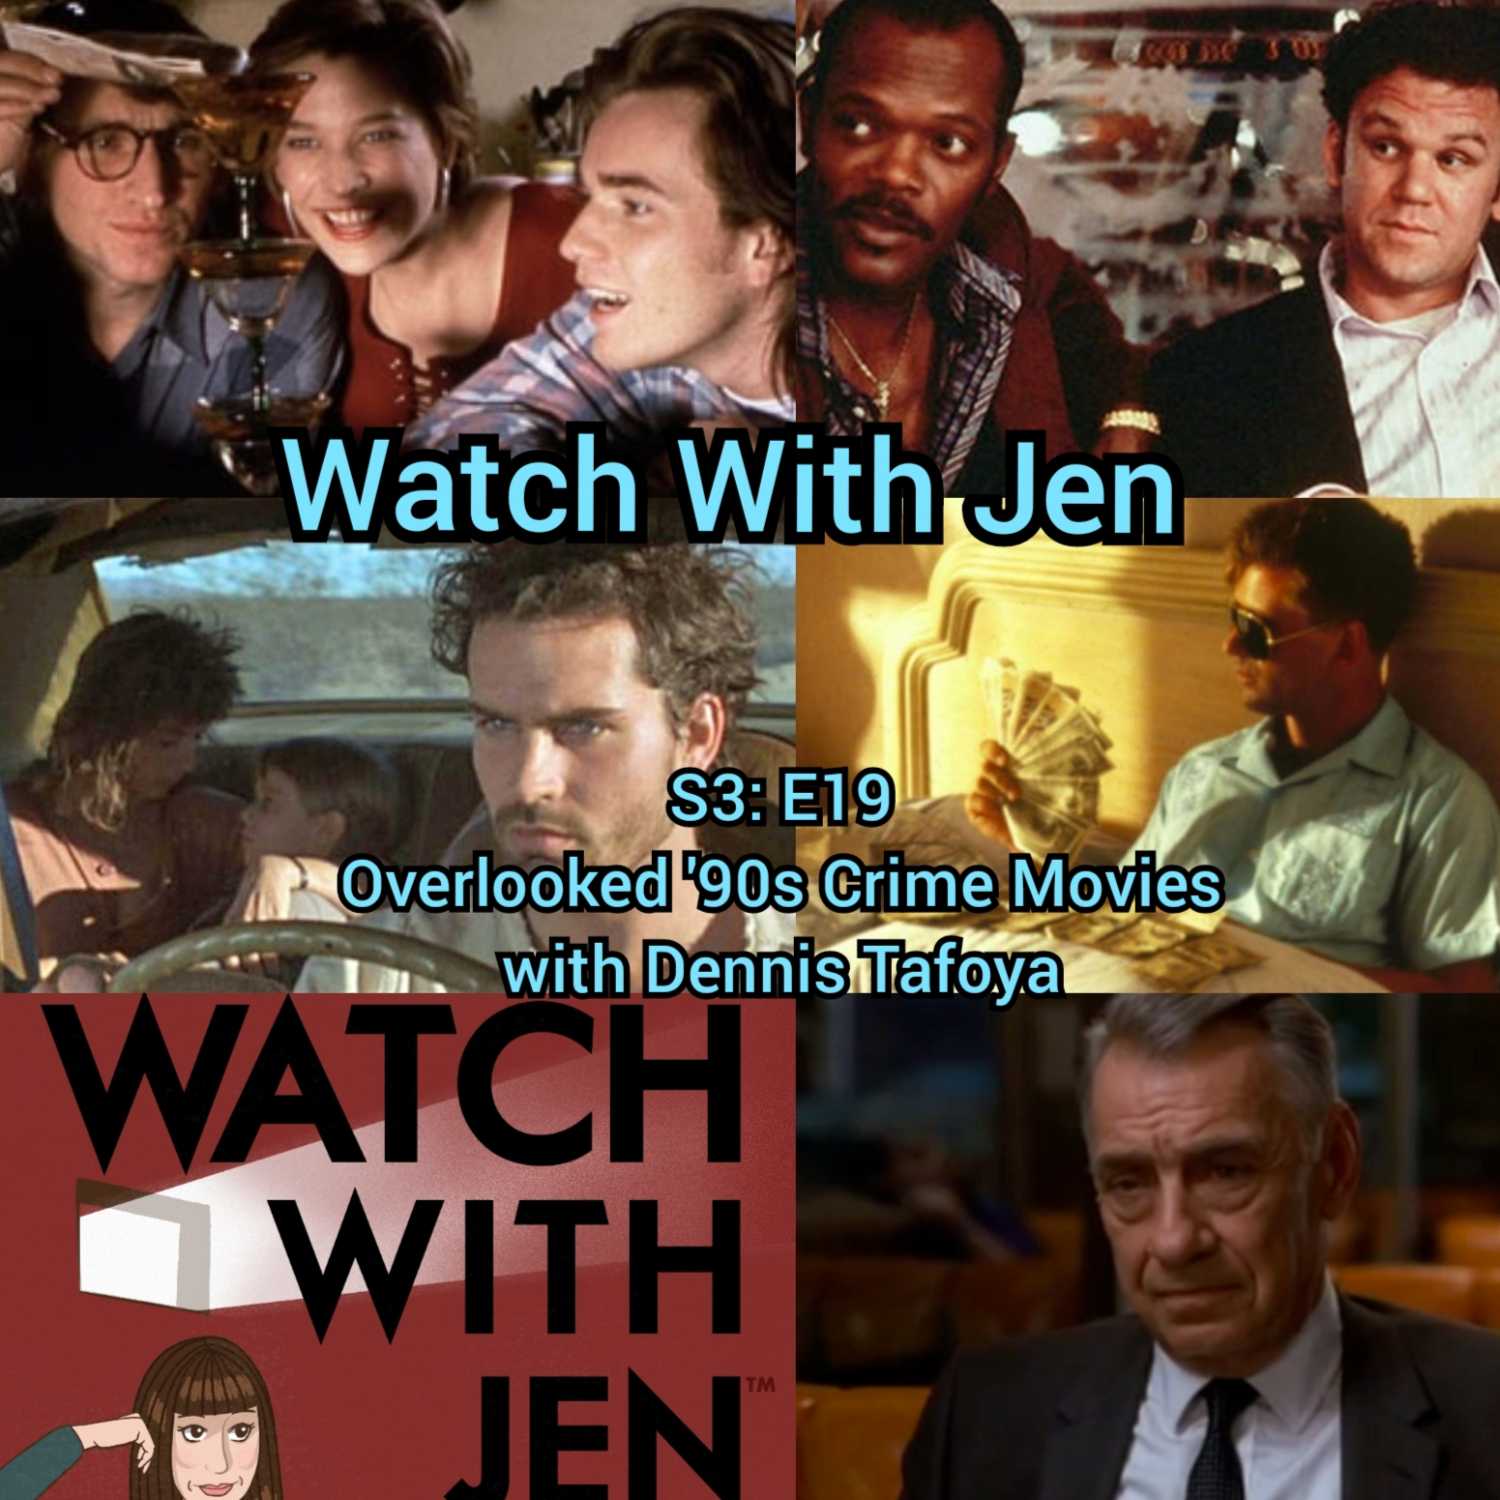 Watch With Jen - S3: E19 - Overlooked ’90s Crime Movies with Dennis Tafoya